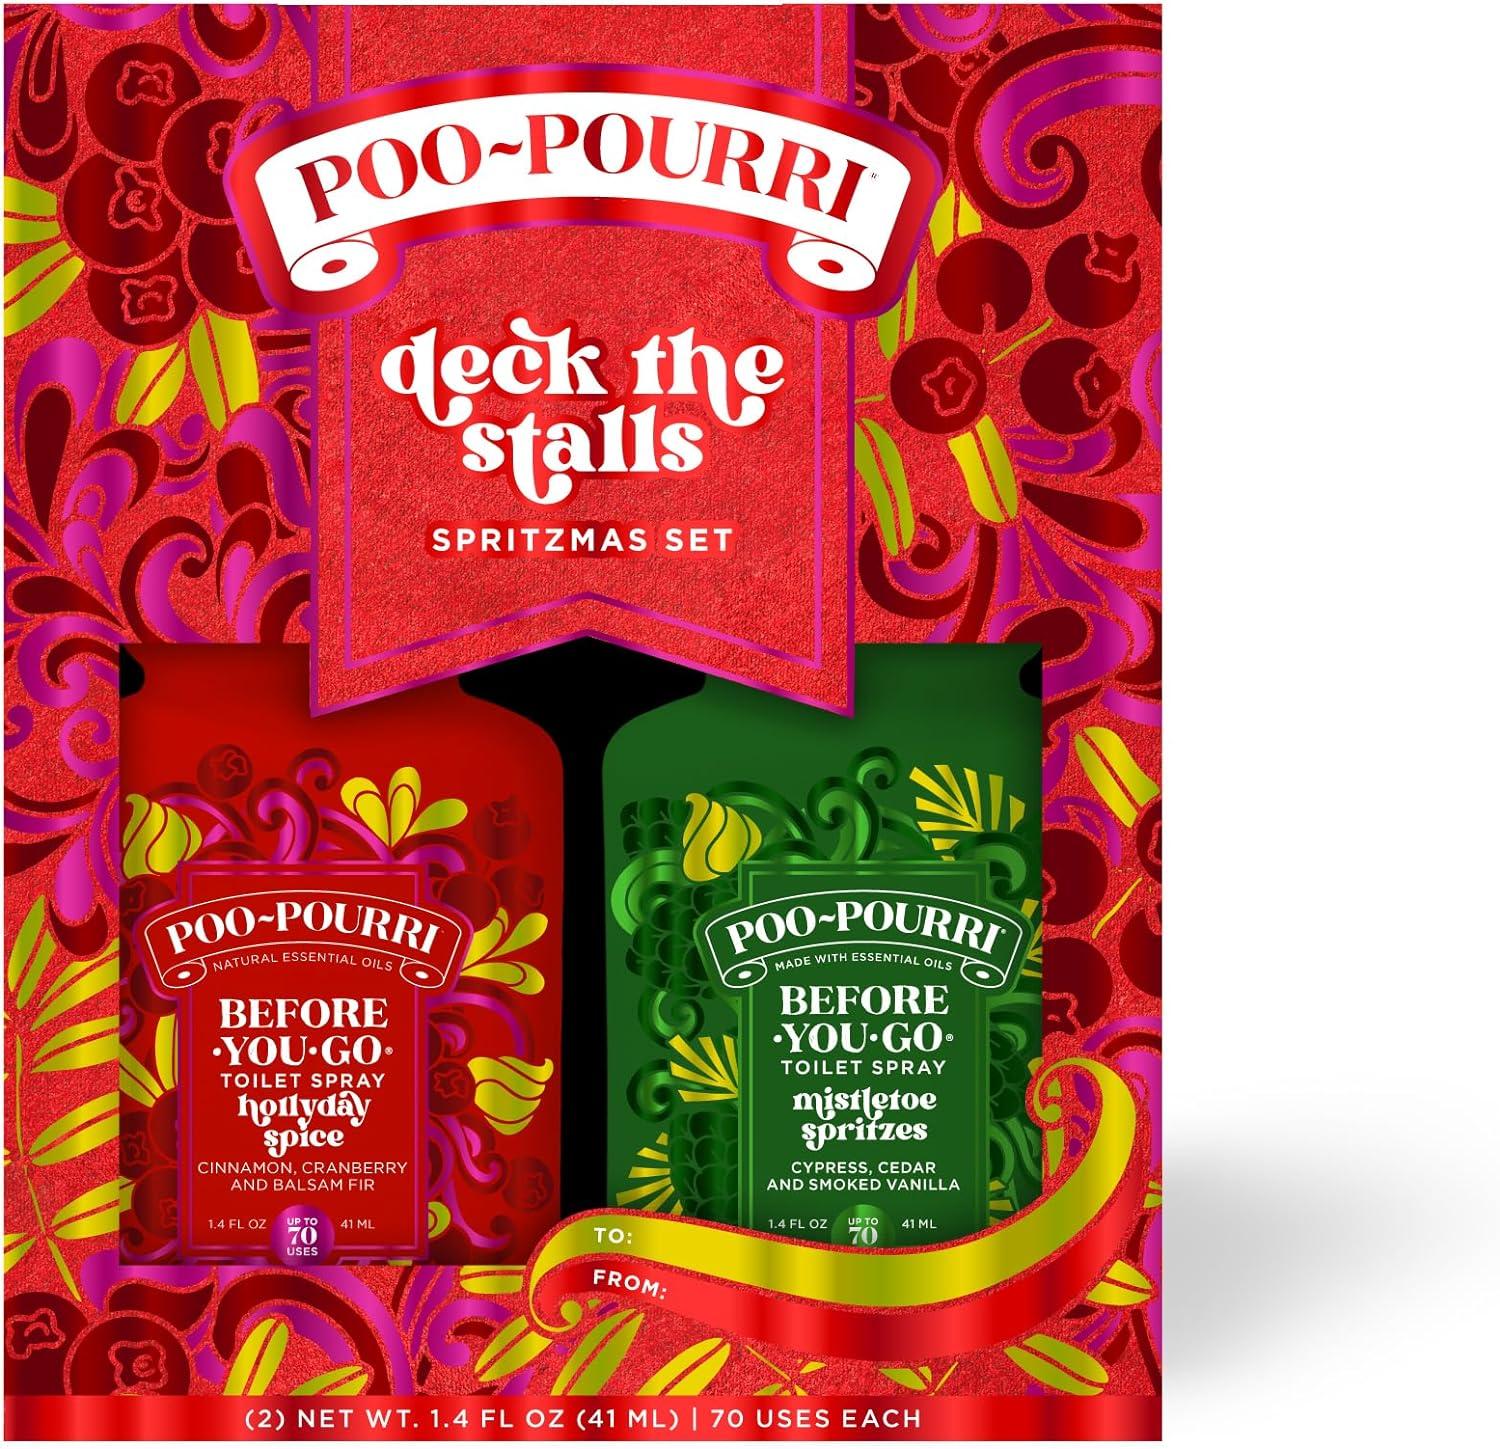 Poo-Pourri Deck the Stalls Gift Set Hollyday Spice and Mistletoe for $9.89 Shipped